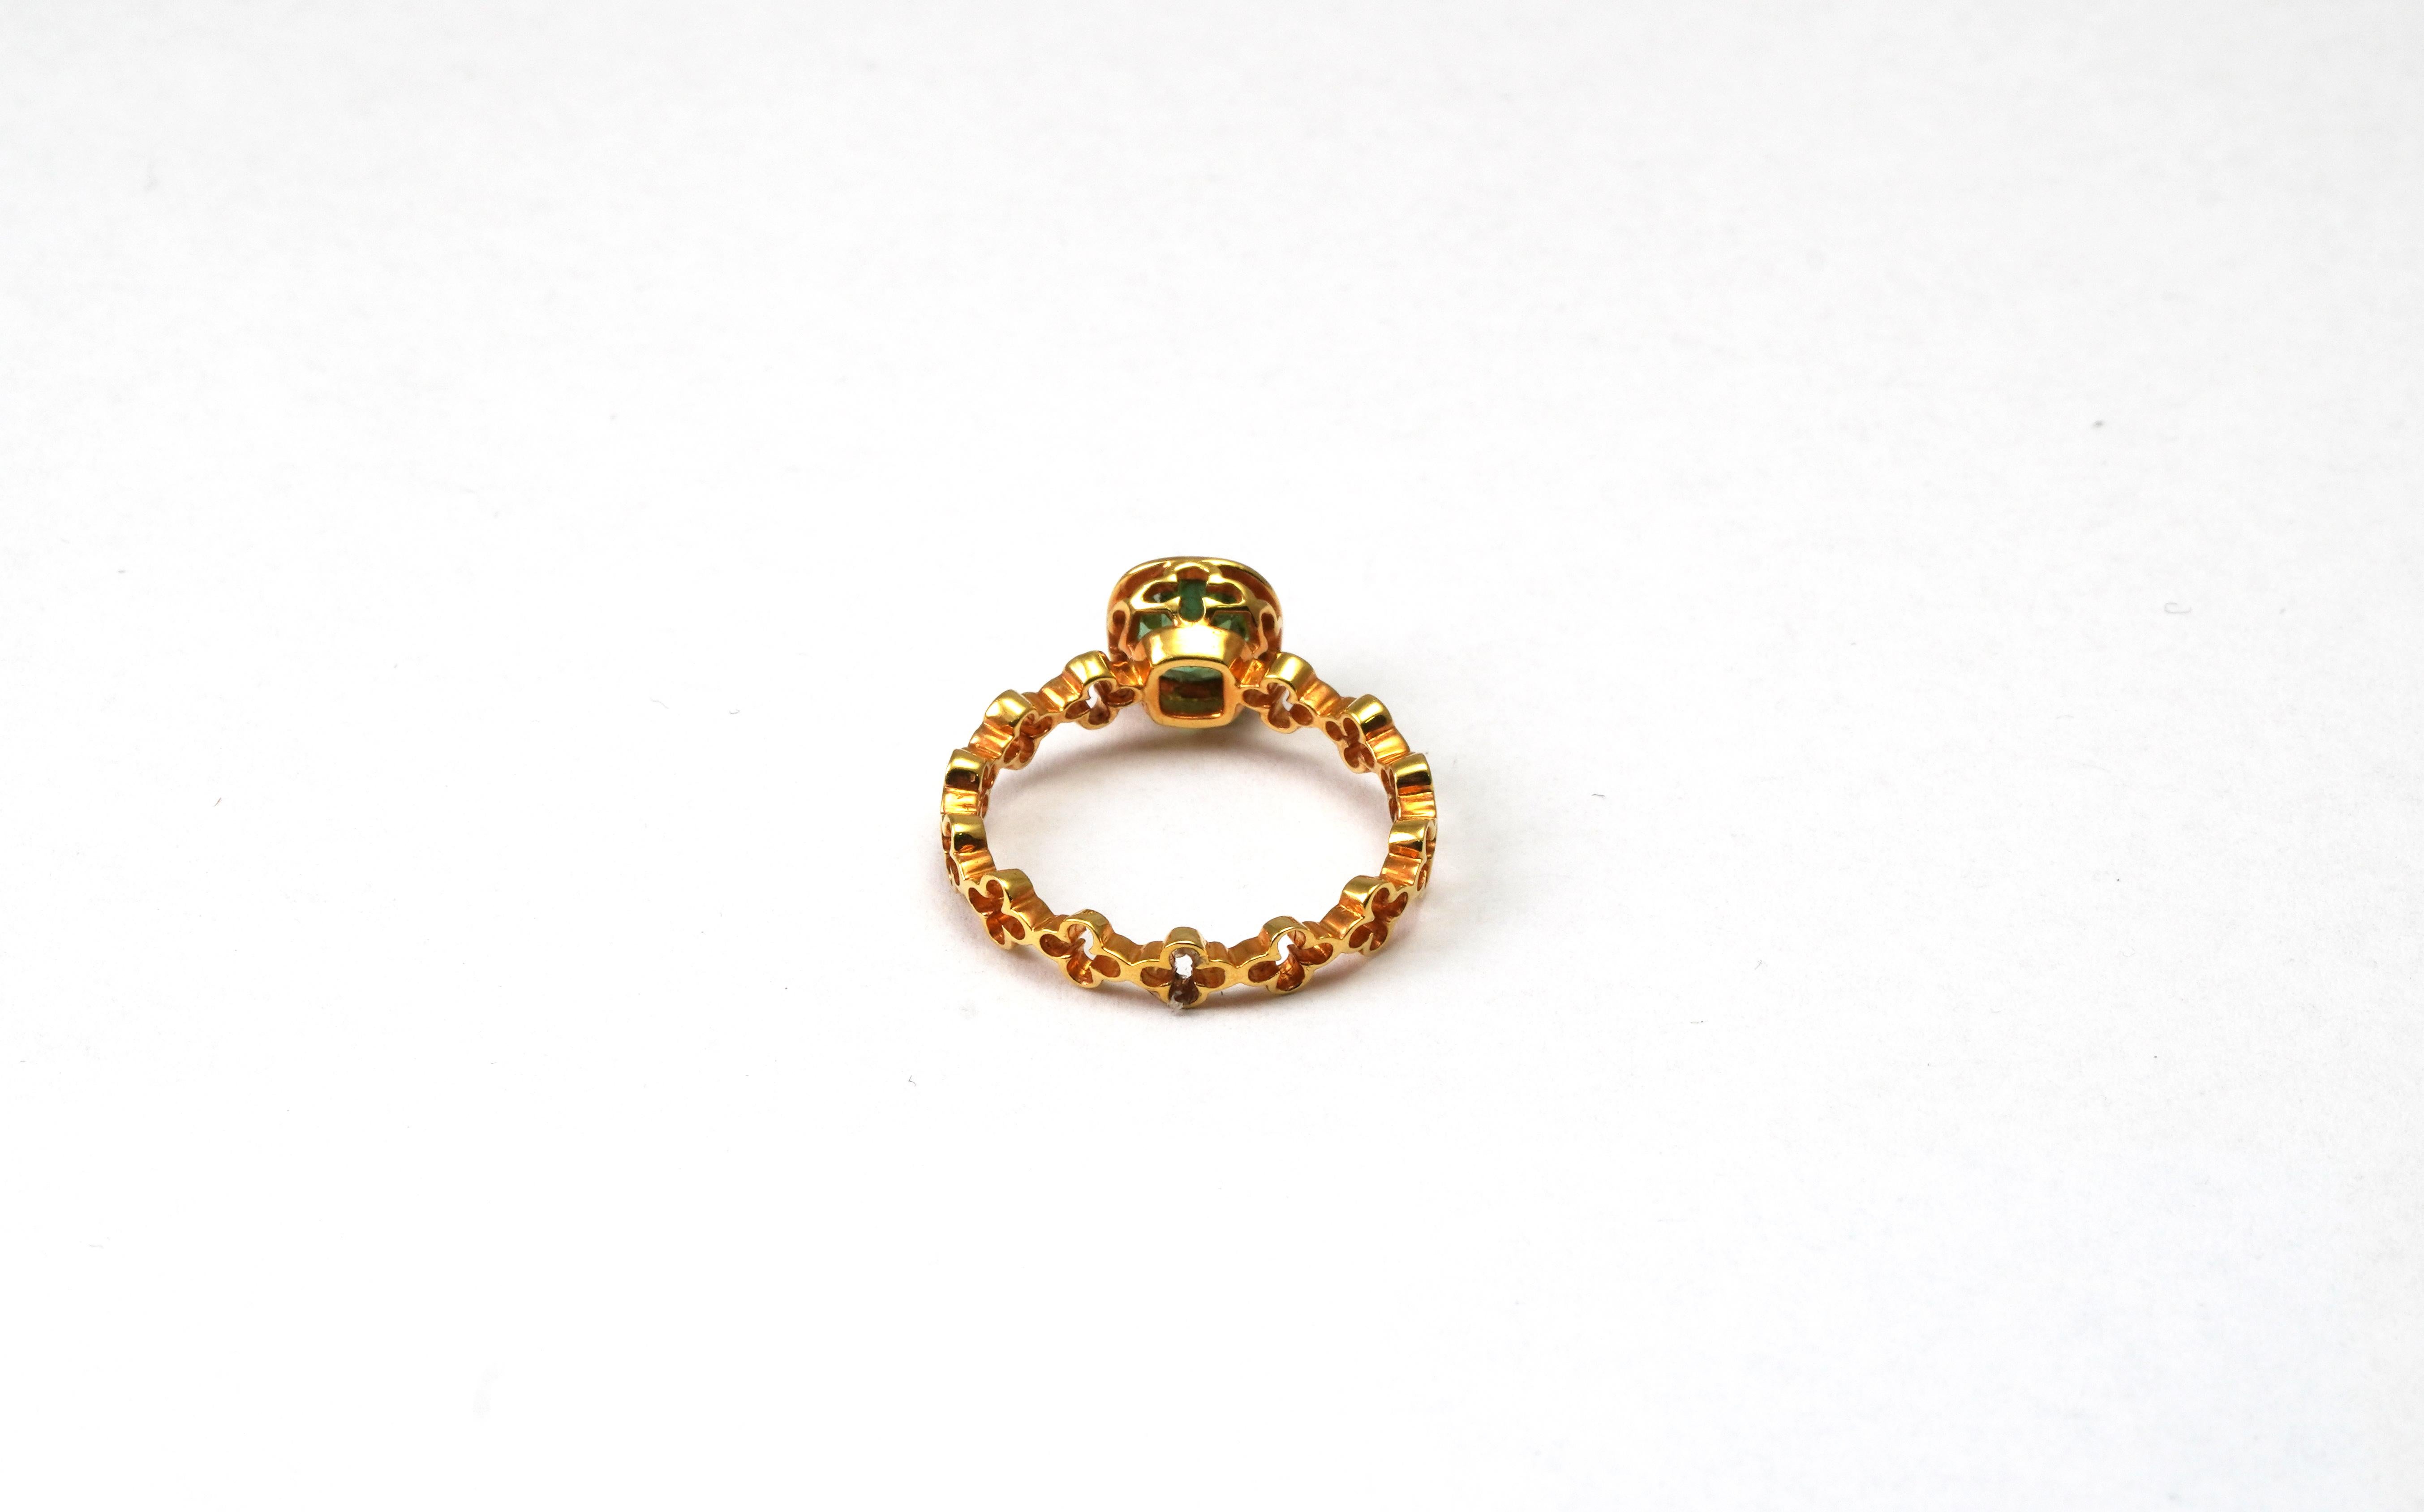 18 kt Gold ring with Green Tourmaline 
Gold color: Yellow
Ring size: 6 US
Total weight: 1.90 grams

Set with:
- Tourmaline
Cut: Cushion
Total weight: 1.00 carat
Color: Green